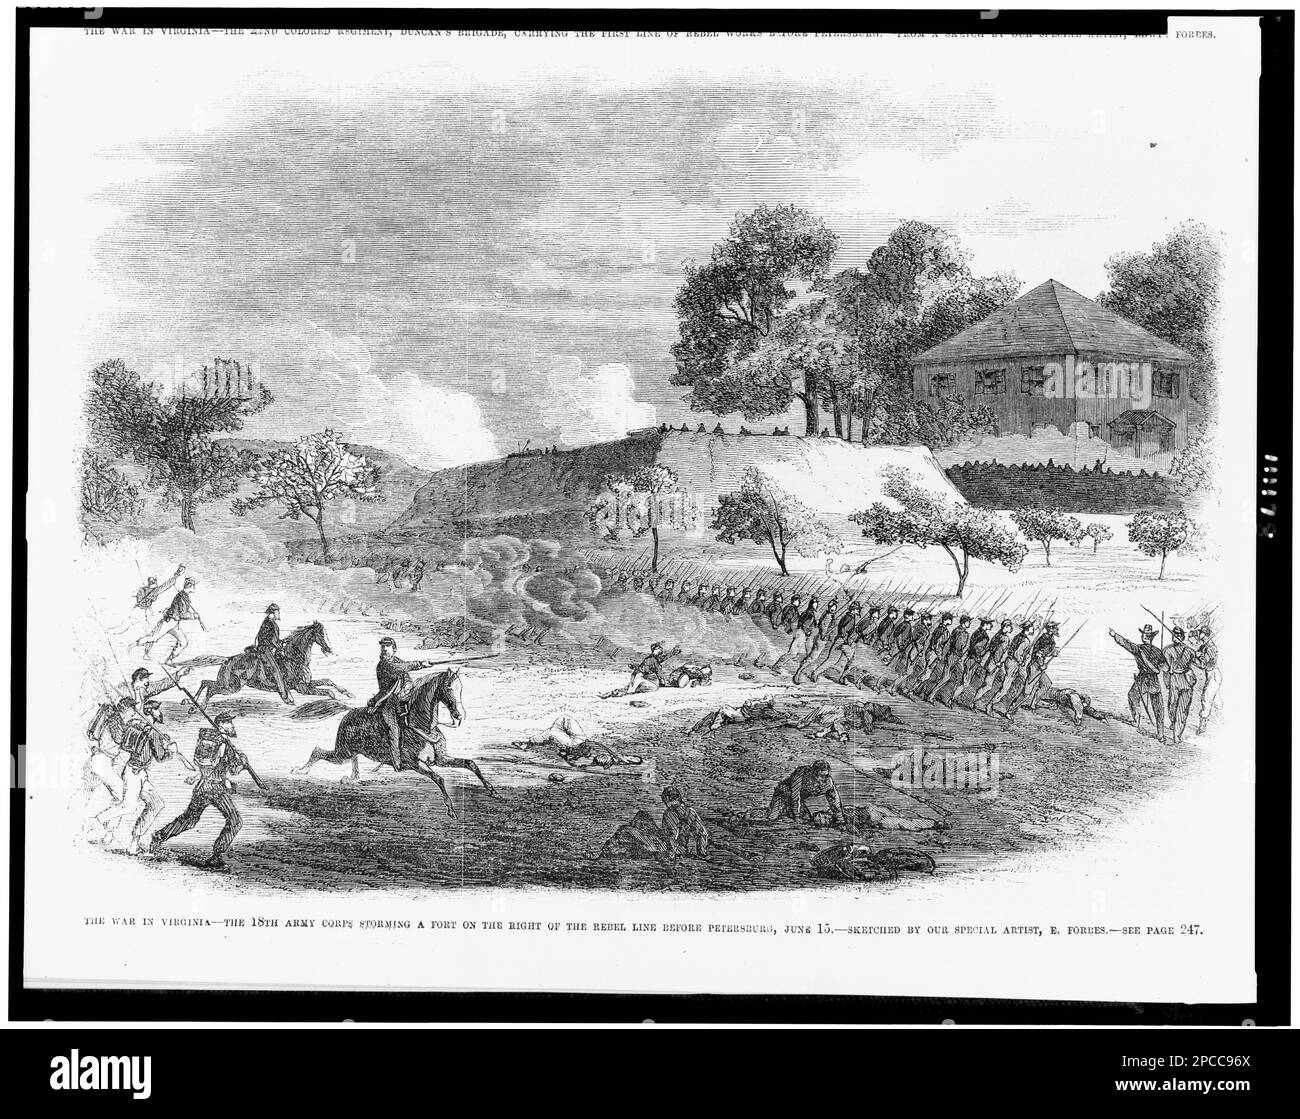 The war in Virginia - the 18th Army Corps storming a fort on the right of the Rebel line before Petersburg, June 15 / sketched by our special artist, E. Forbes.. Illus. in: Frank Leslie's illustrated newspaper, 1864 July 9, p. 244. United States, History, Civil War, 1861-1865, Campaigns & battles, Soldiers, Virginia, Petersburg, 1860-1870. Stock Photo